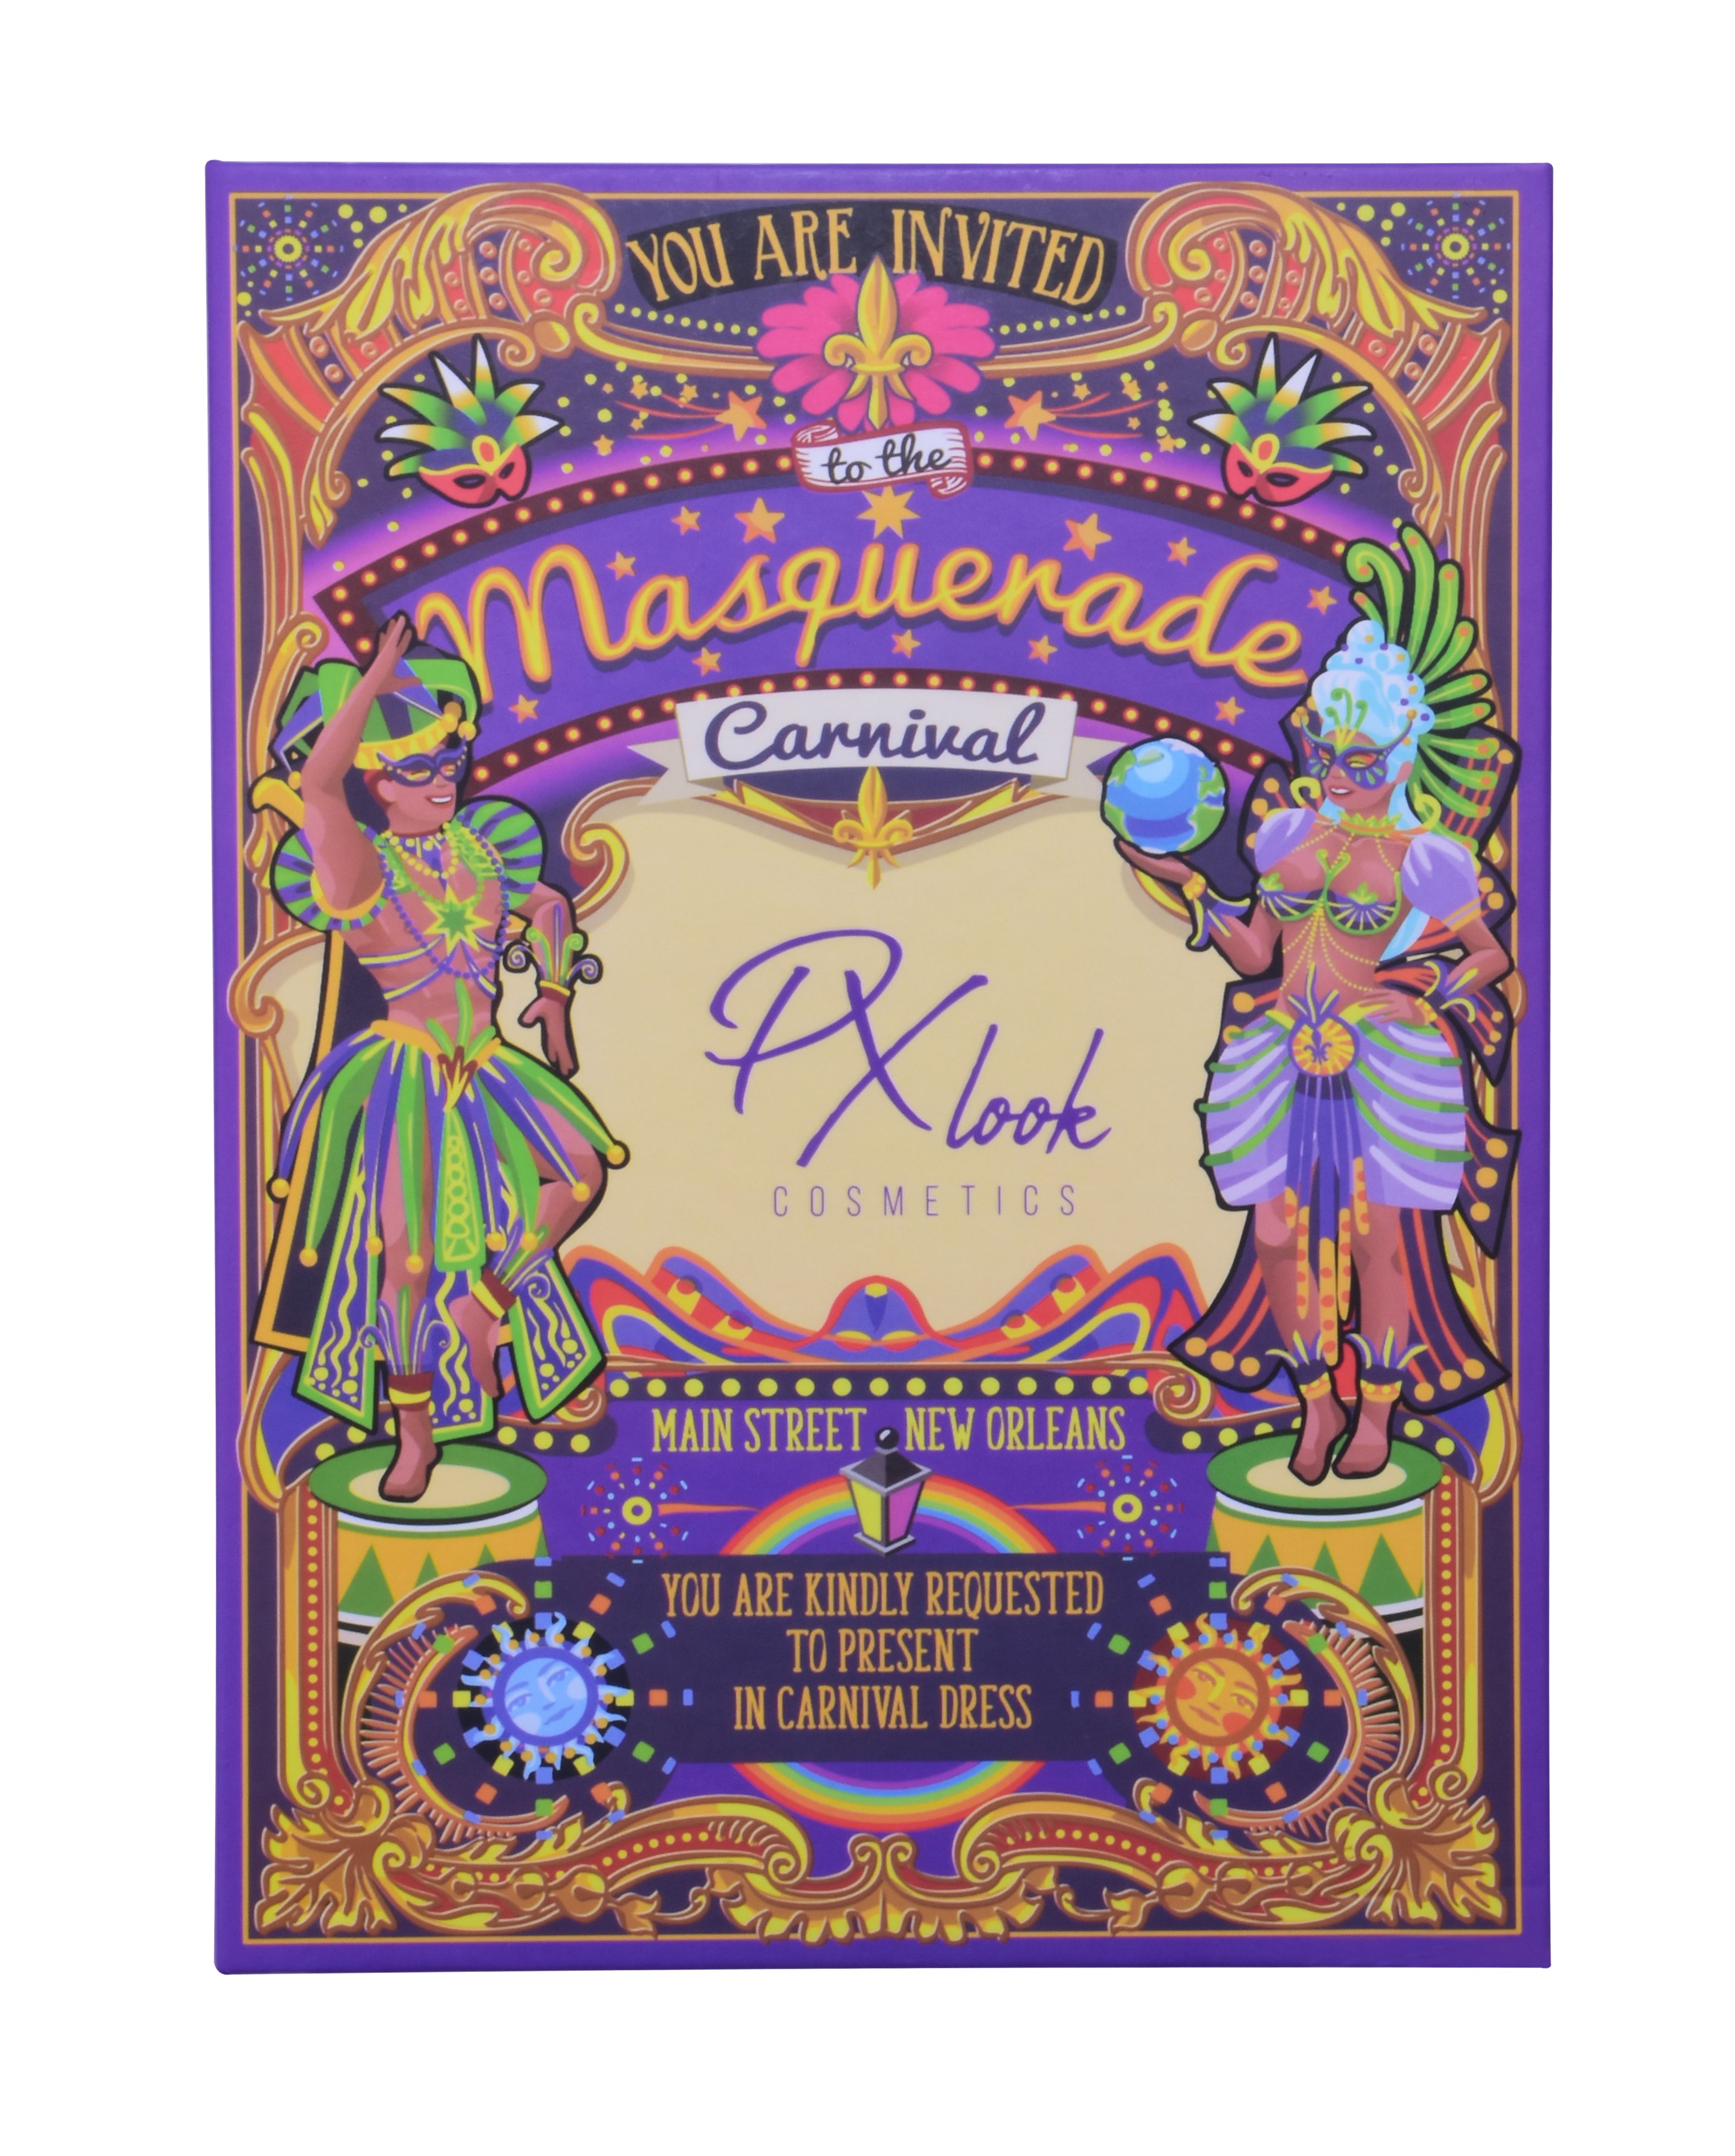 Px Look Masquerade Carnival Eyeshadow Palette